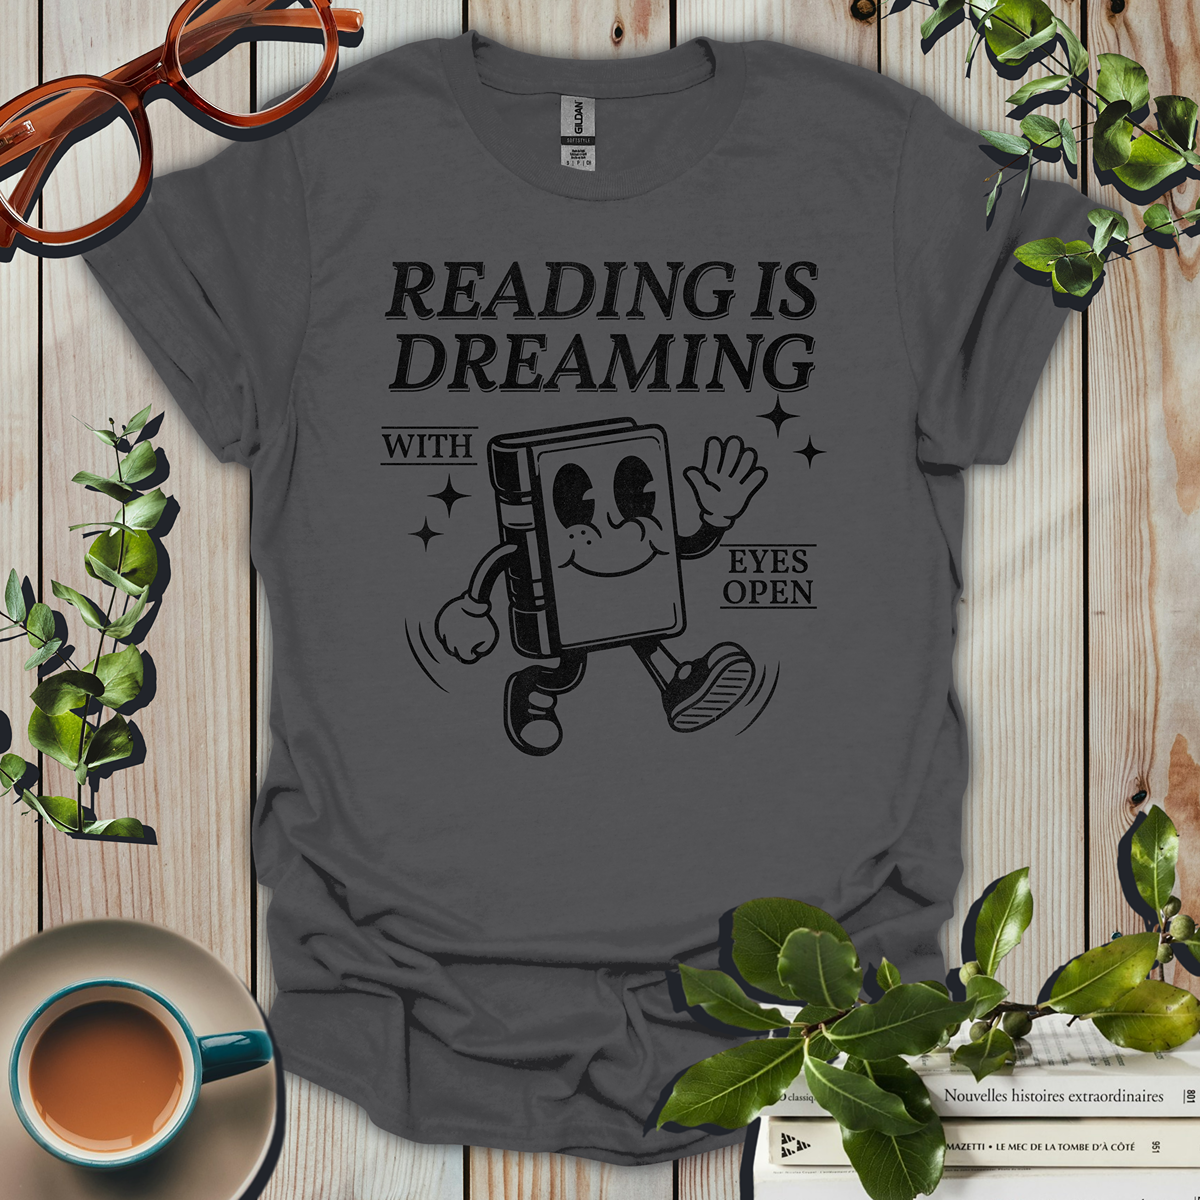 Reading Is Dreaming With Eyes Open T-Shirt